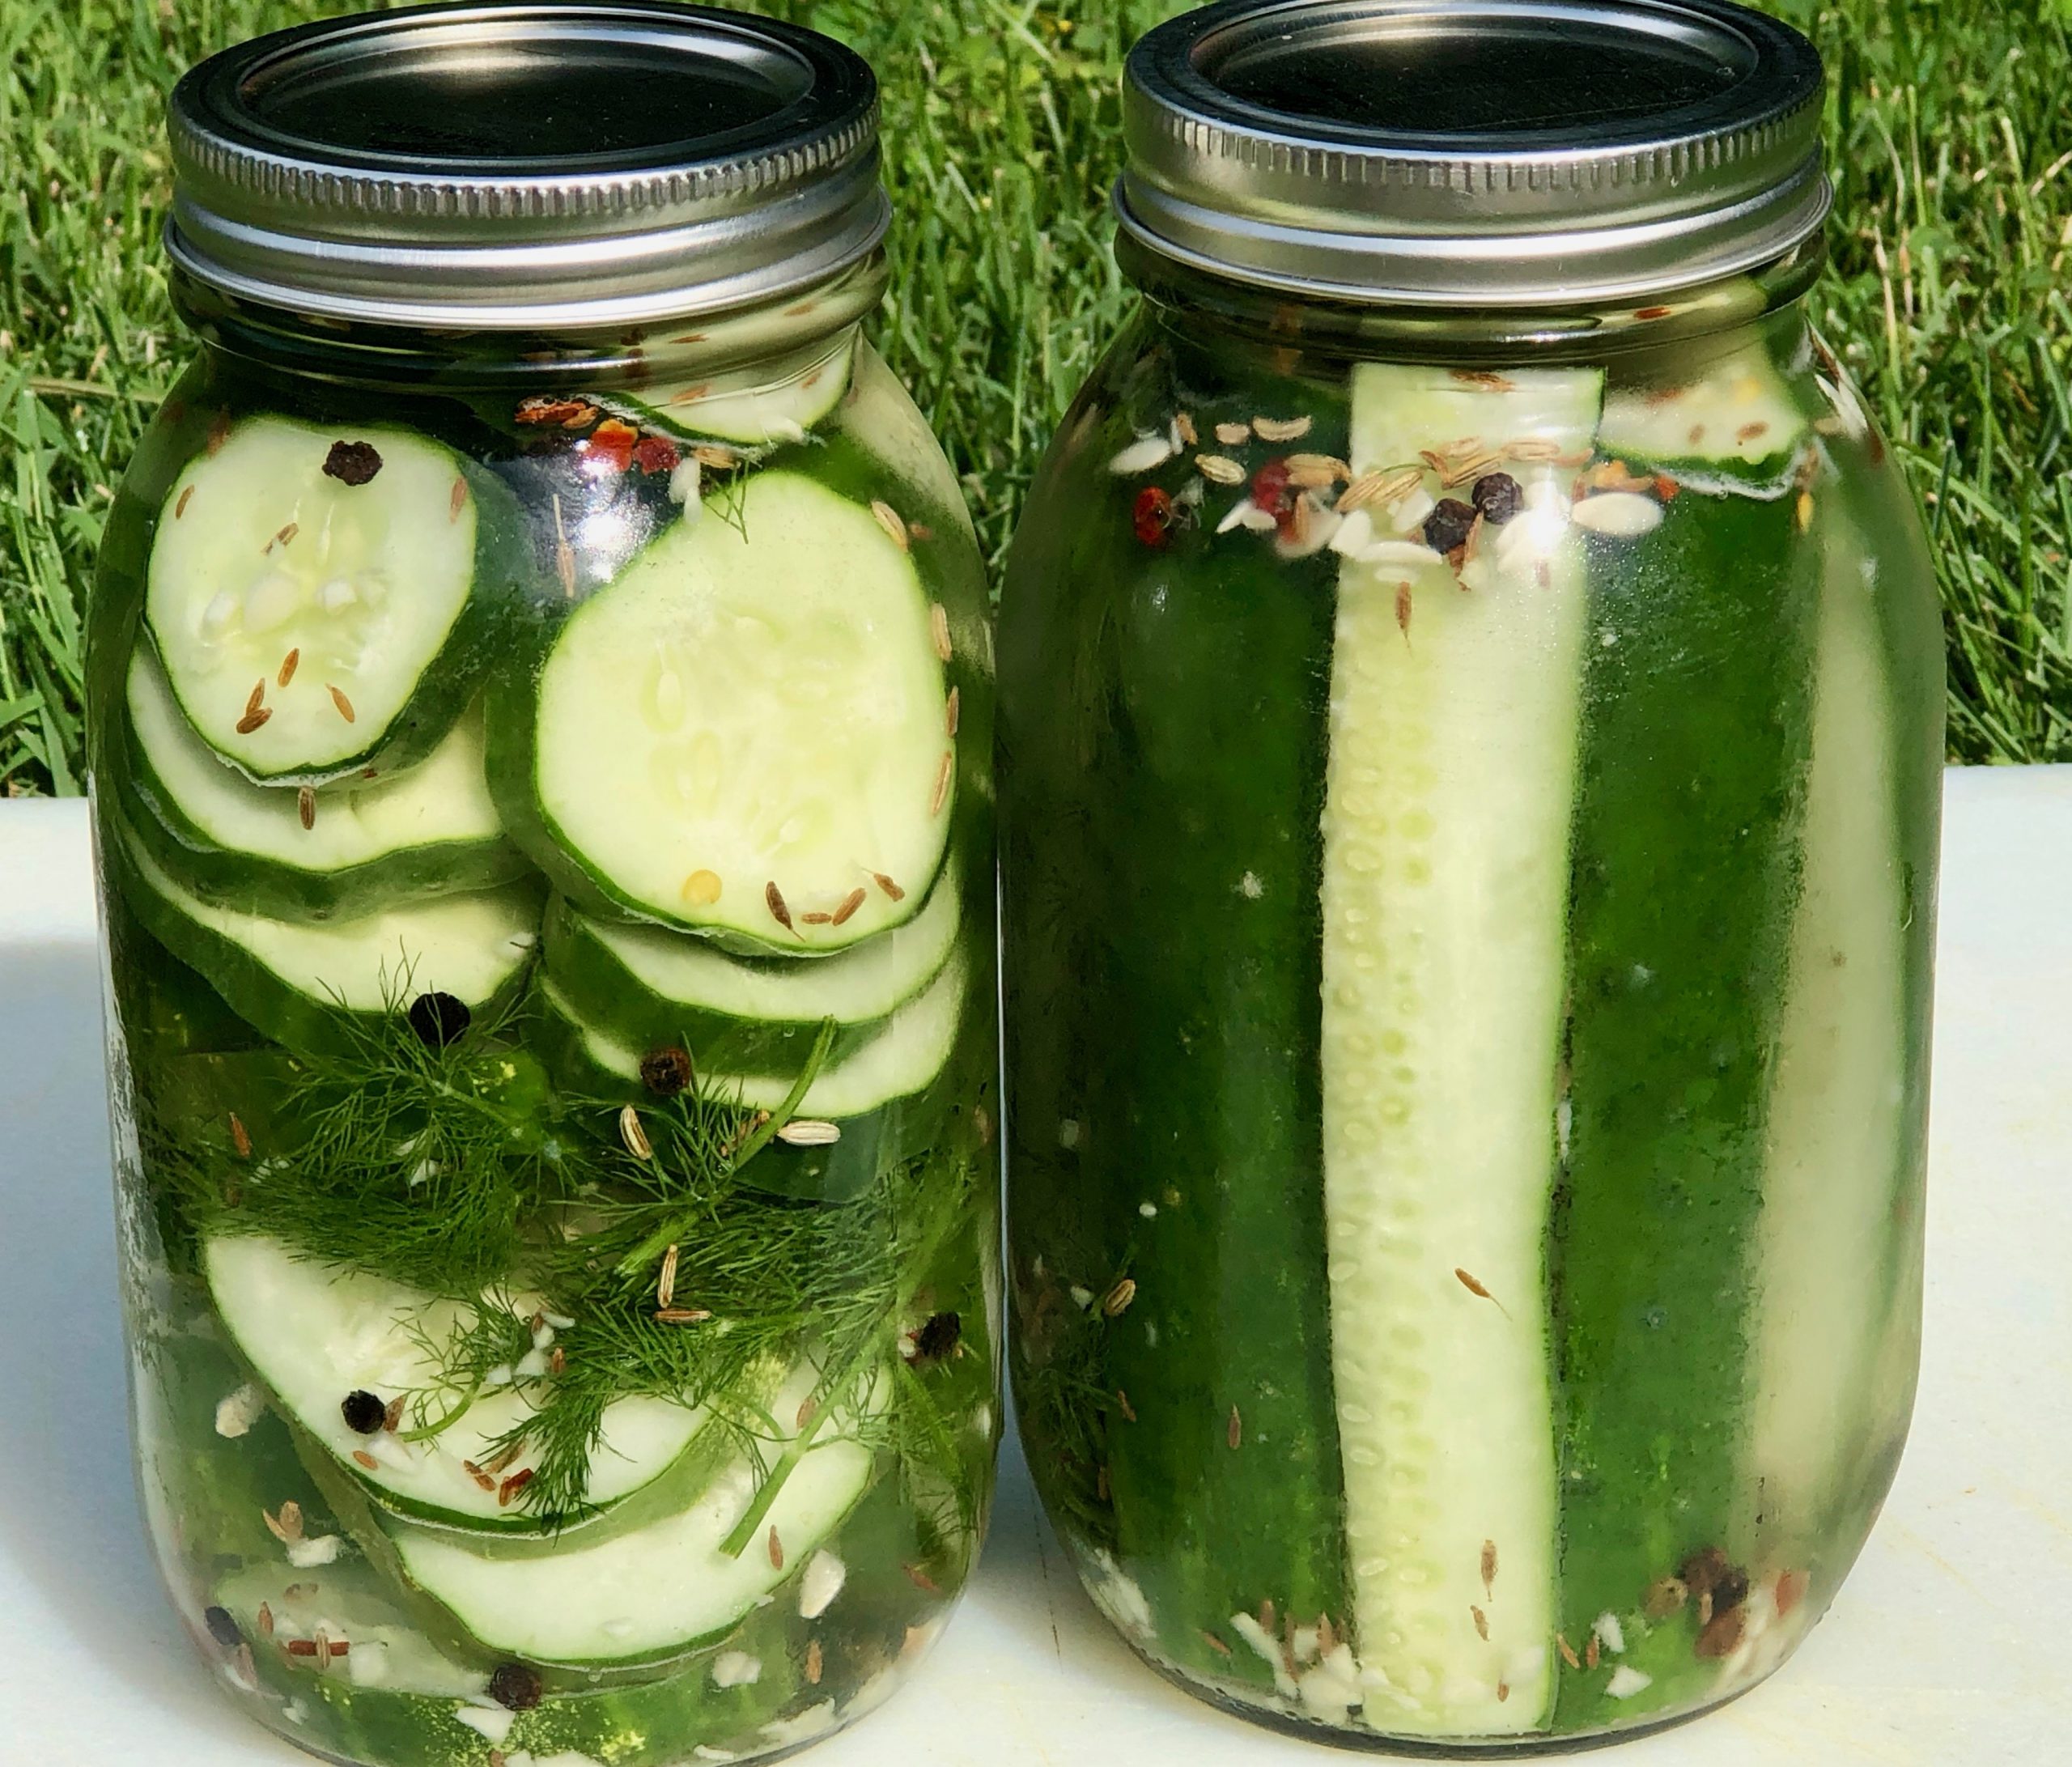 Homemade Dill Pickles…Easy as 1,2,3